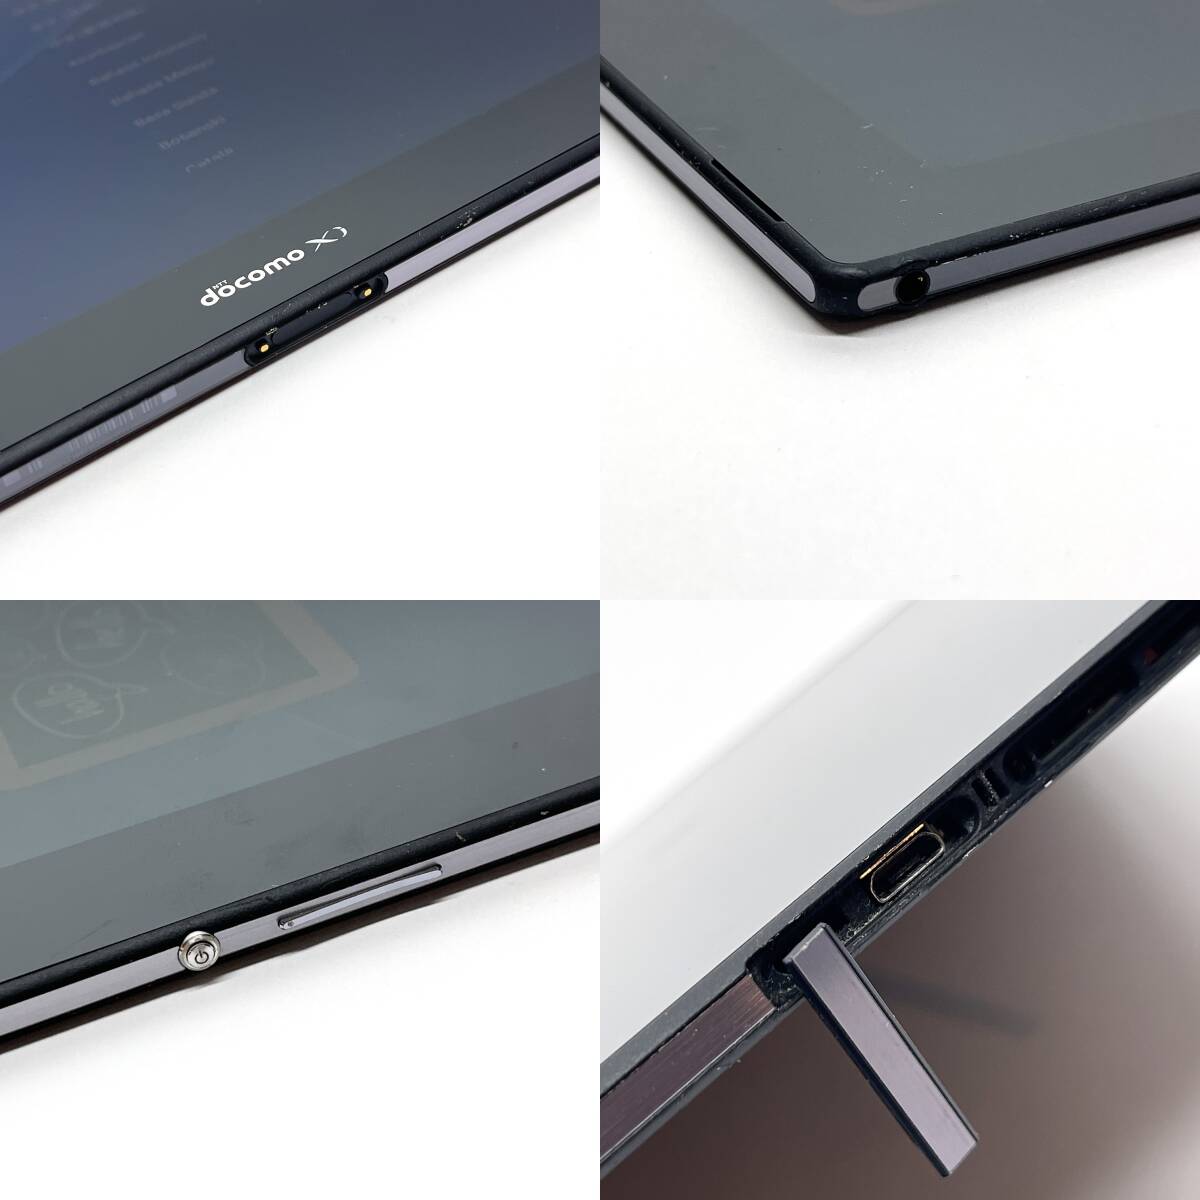 tu098 タブレット まとめ SONY ソニー XPERIA Z2 Tablet SO-05F Amazon アマゾン Fire HD 8 L5S83A 計5点 ※ジャンク_画像4